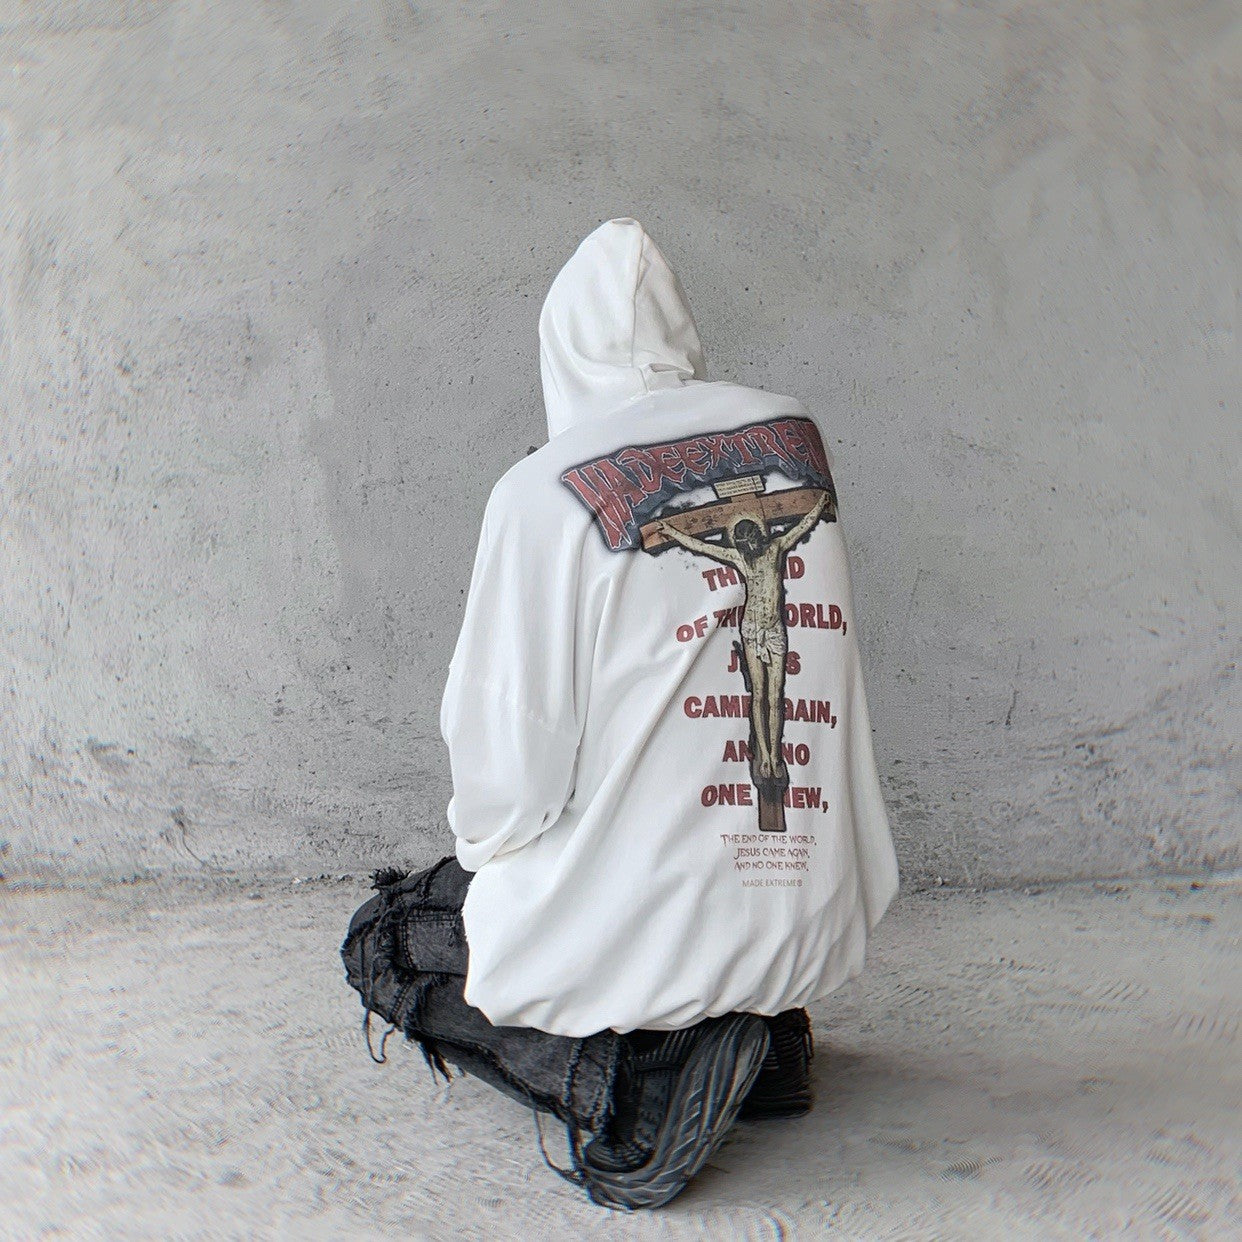 Made Extreme Crucifixion Hoodie